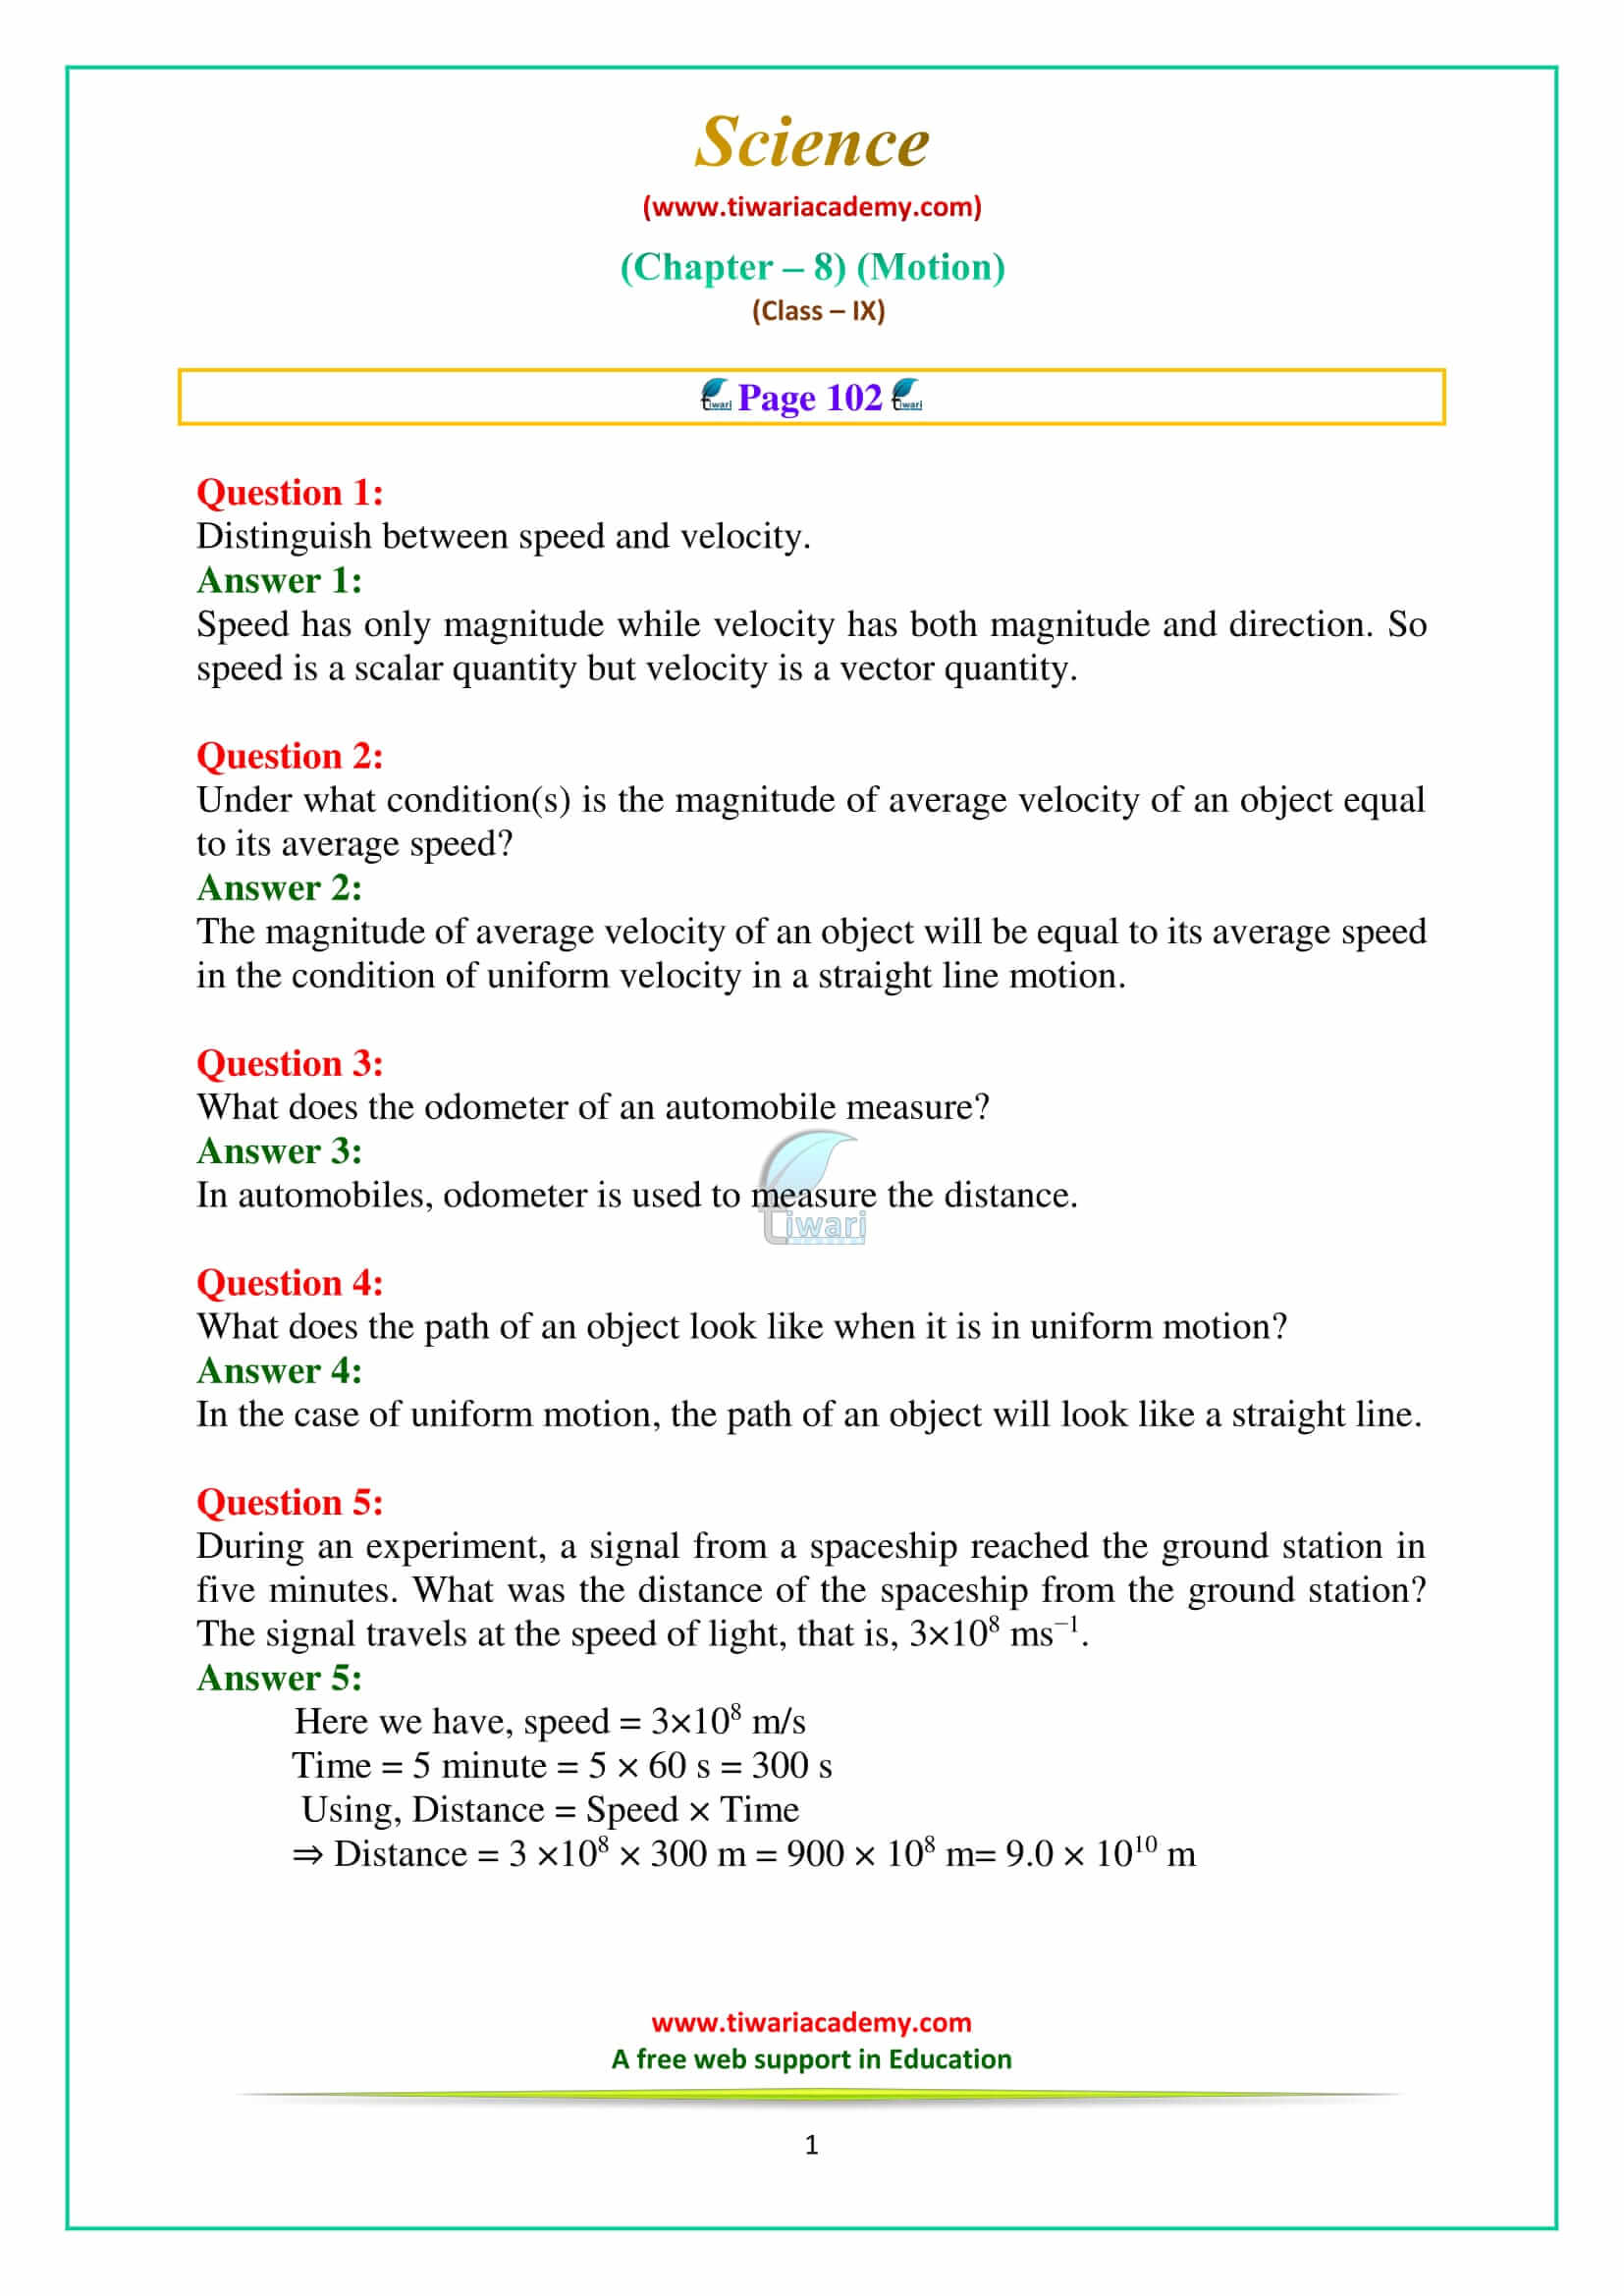 NCERT Solutions for Class 9 Science Chapter 8 Motion Intext Questions on Page 102 Answers